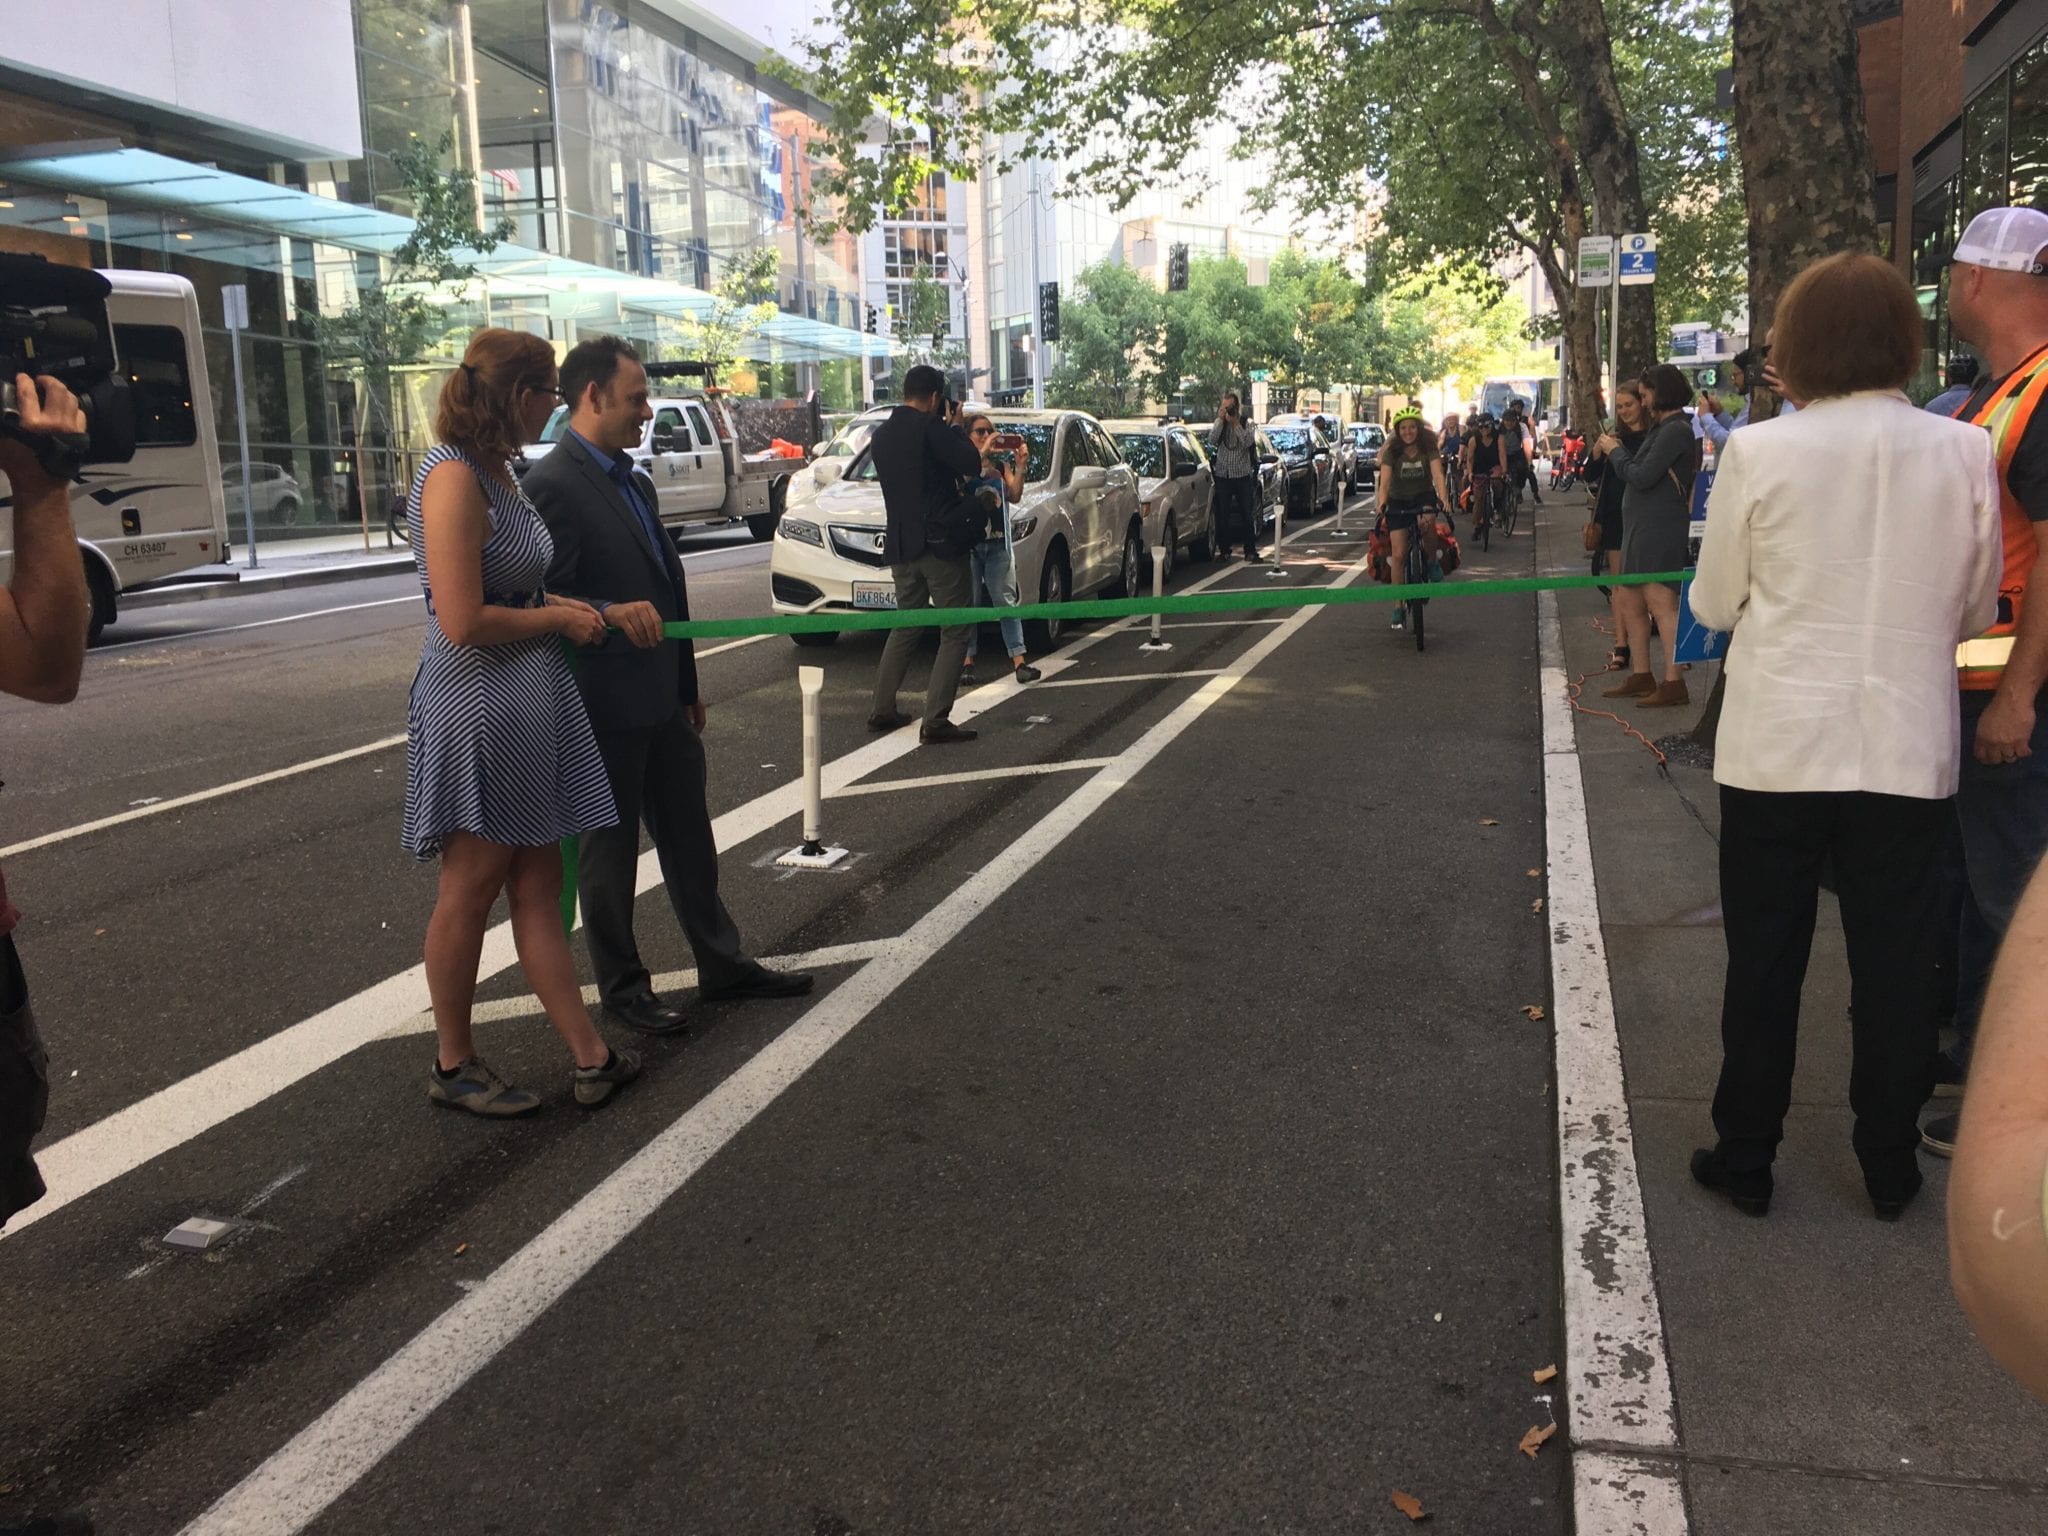 Sam Zimbabwe, Vicky Clark, and Mayor Jenny Durkan hold the ribbon as a person biking approaches. Celebrating the opening of the bike lane!